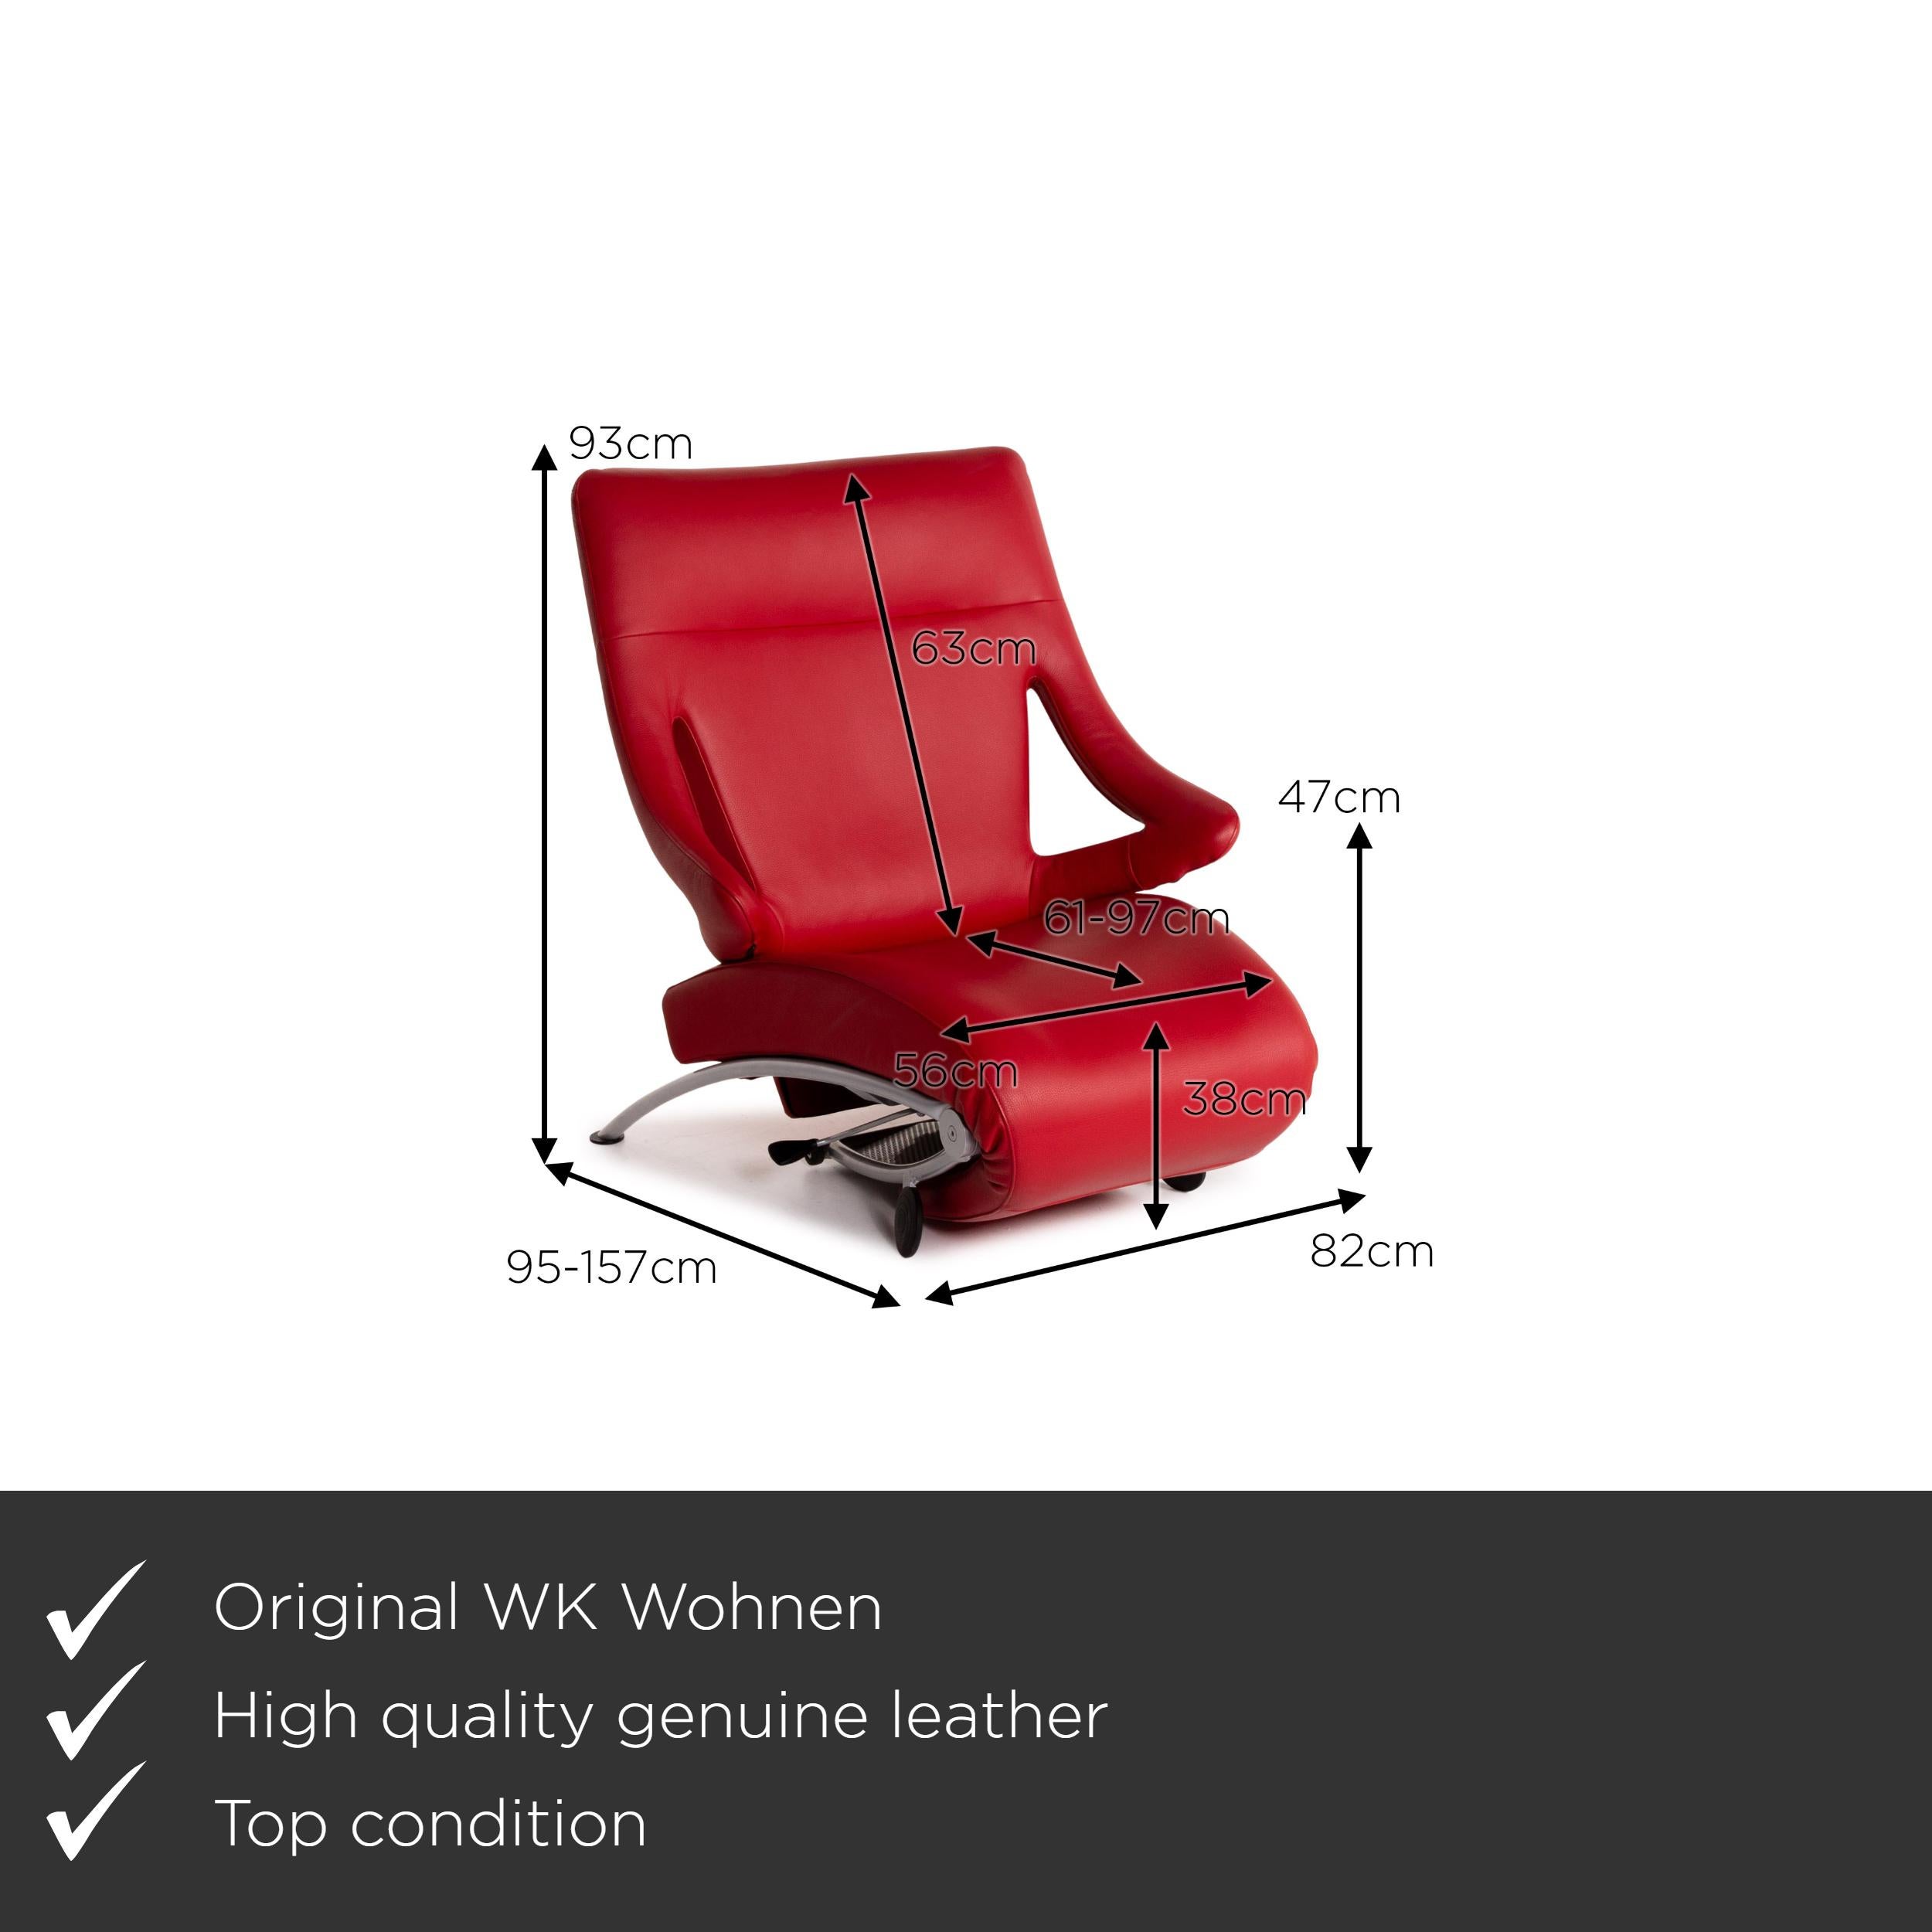 We present to you a WK Wohnen Solo 699 leather armchair red lounger relaxation function.

 

 Product measurements in centimeters:
 

Depth 95
Width 82
Height 93
Seat height 38
Rest height 47
Seat depth 61
Seat width 56
Back height 63.